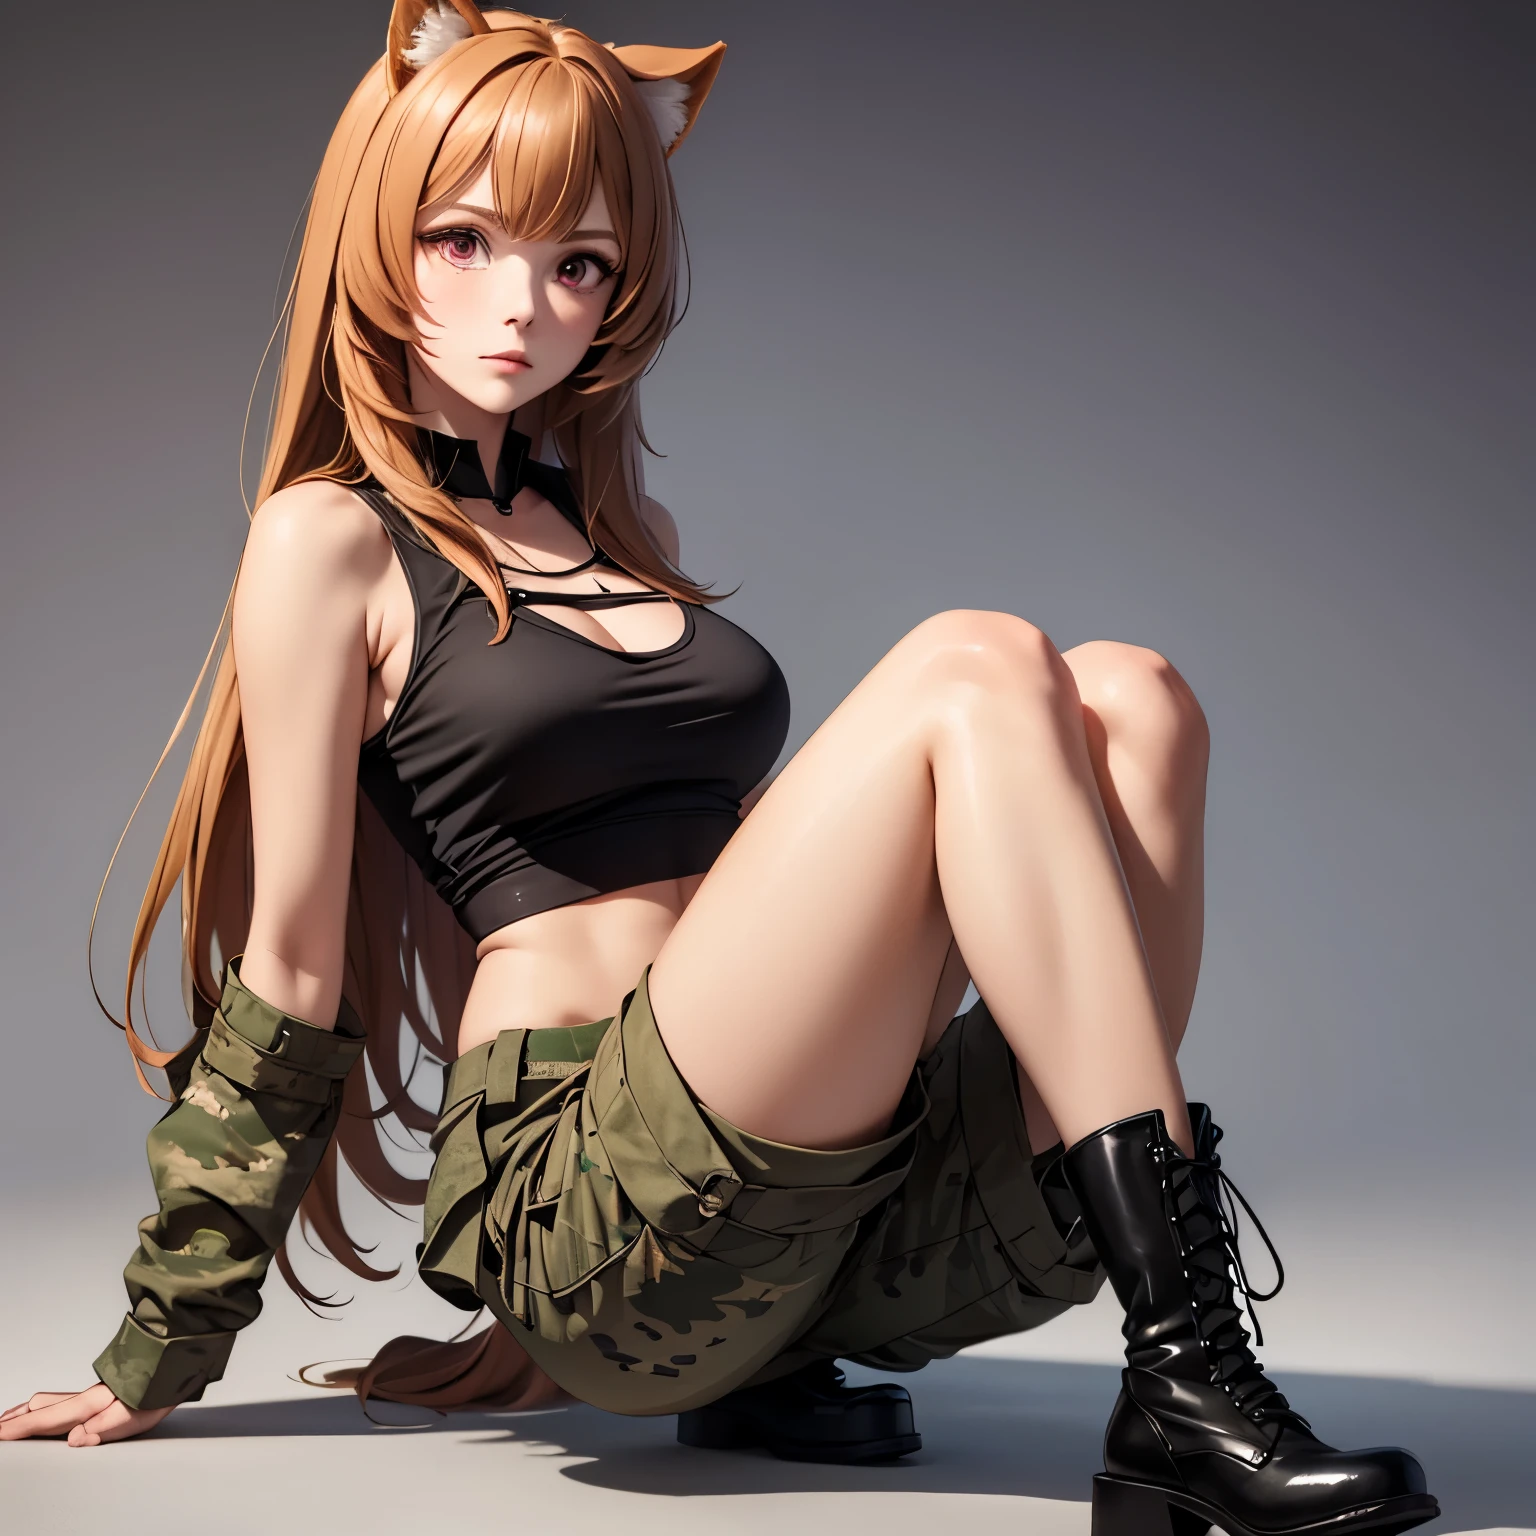 beautiful woman 21 years old with round animal ears ruby red eyes and bright silky orange hair, pechos grandes bien formados. orejas de animal redondas. wears a black sleeveless top with bare abdomen and camouflage military pants and military boots embarrassed expression. fondo base militar